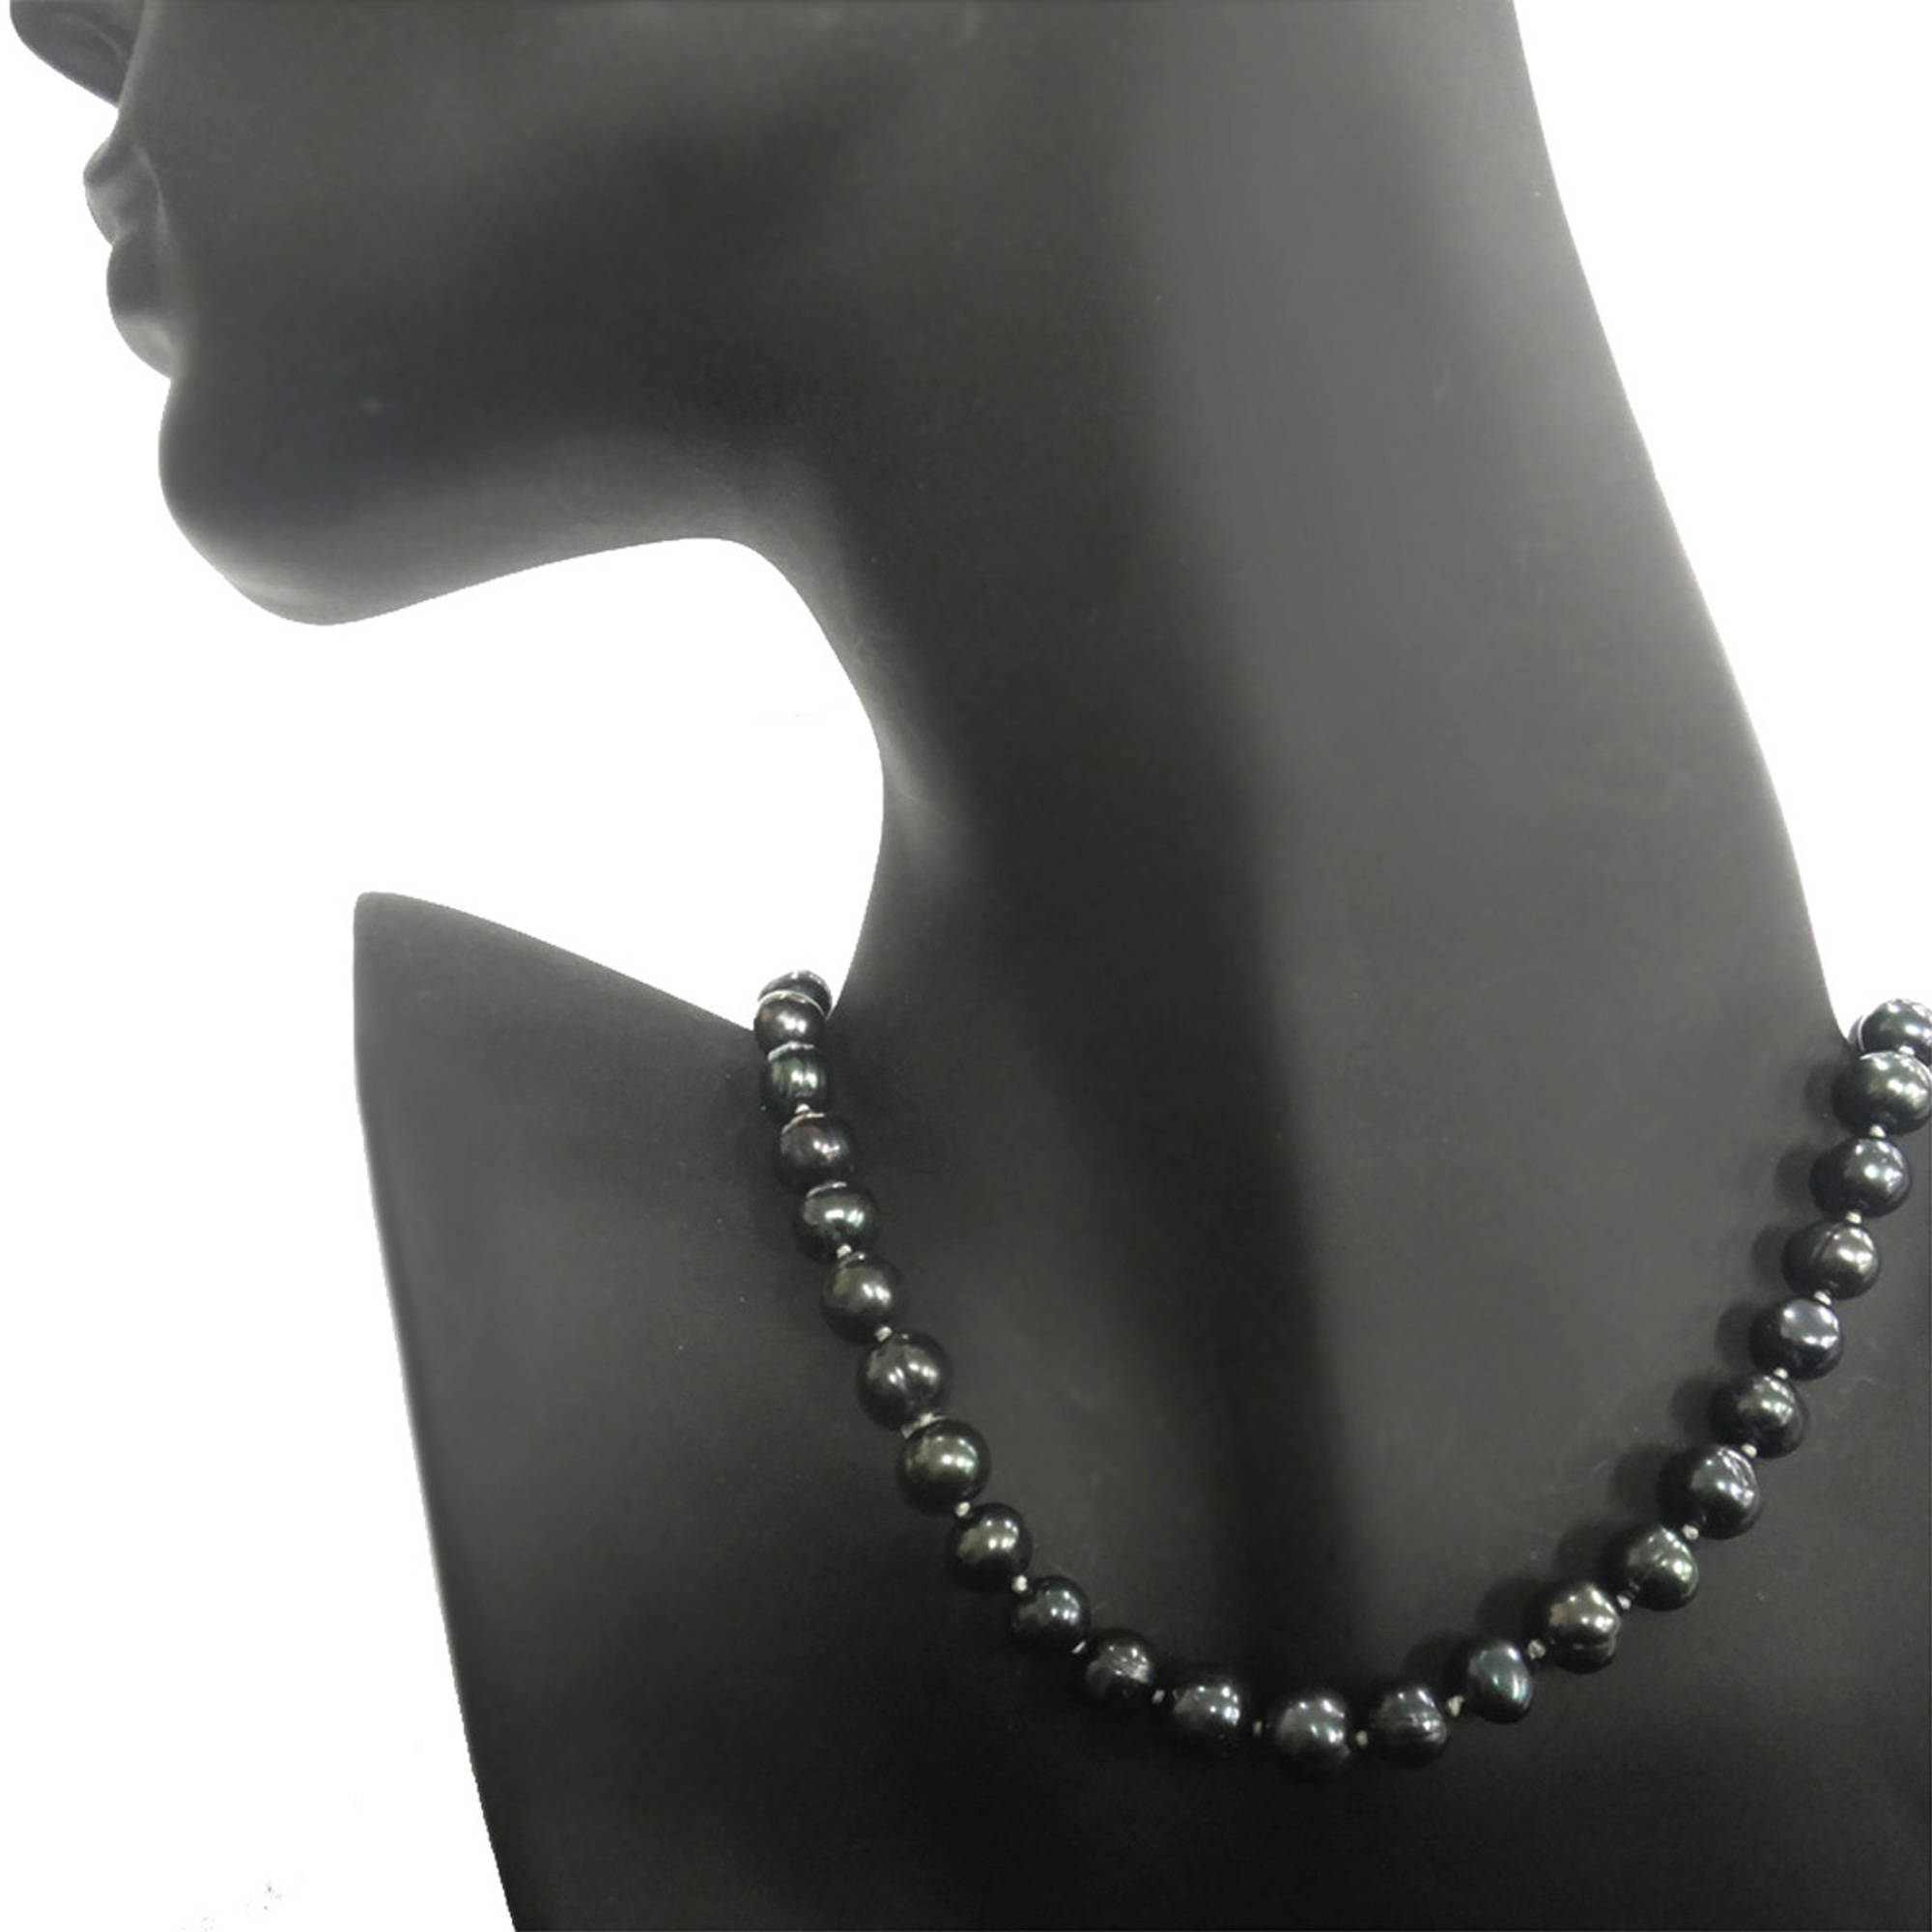 8-9mm Peacock Freshwater Cultured Pearl Necklace, 18" - image 2 of 2